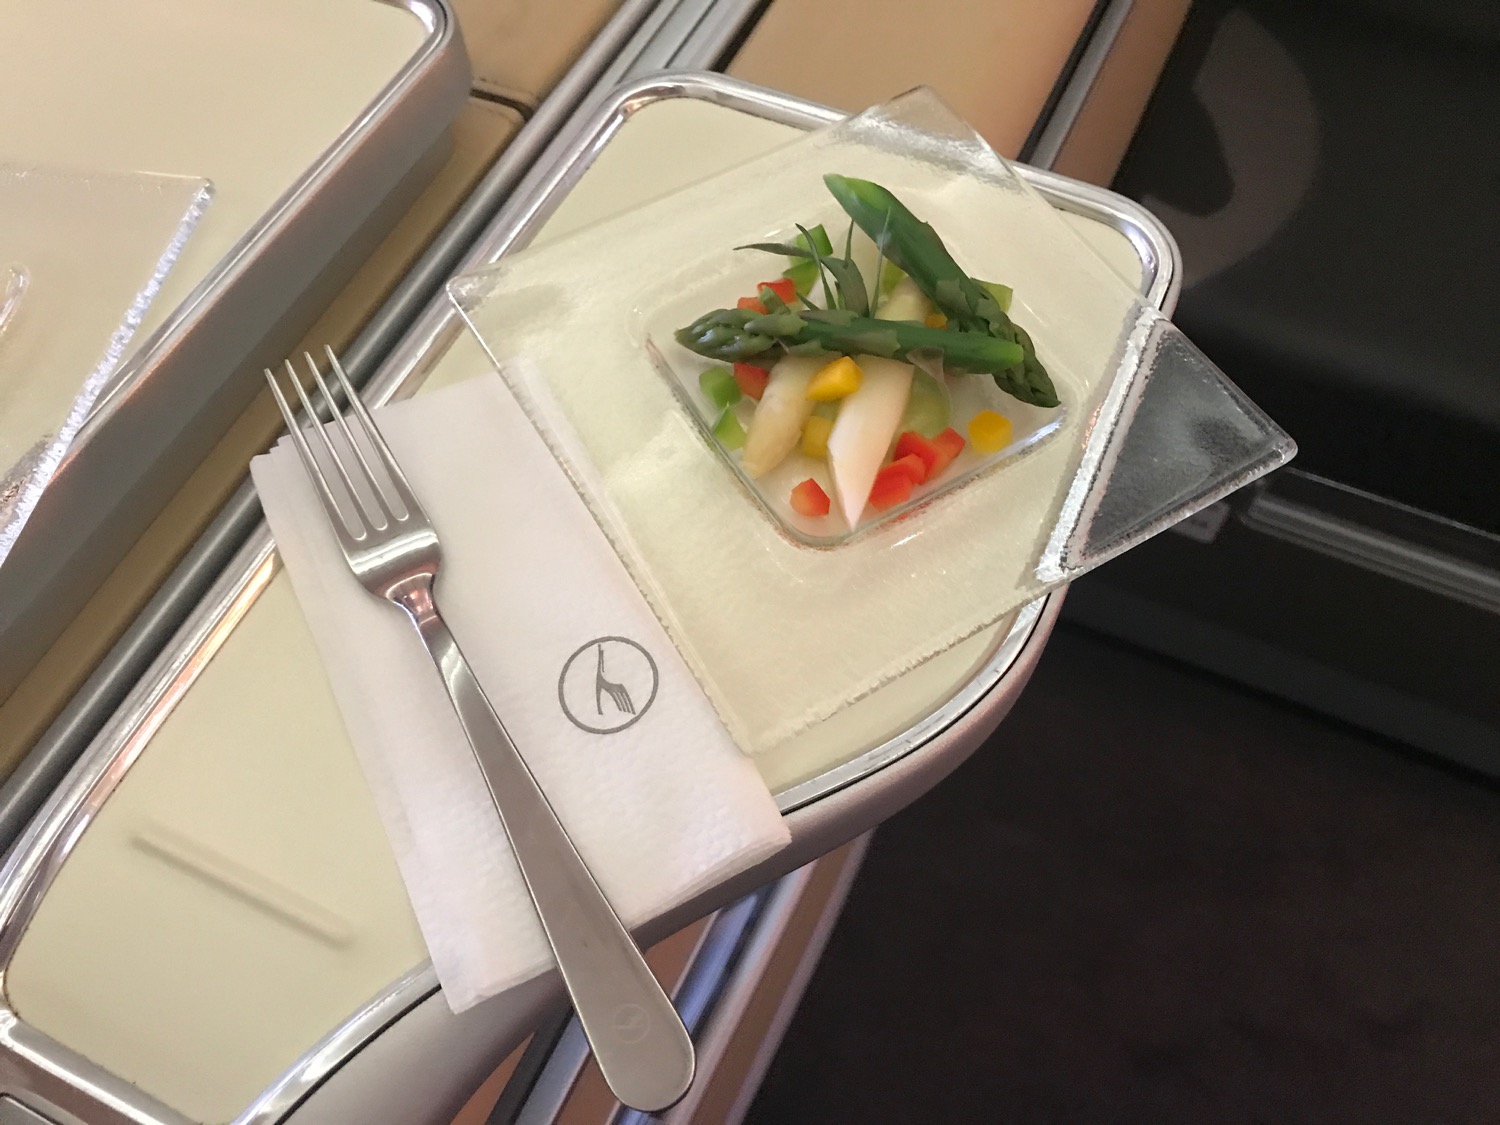 a plate of vegetables and a fork on a napkin